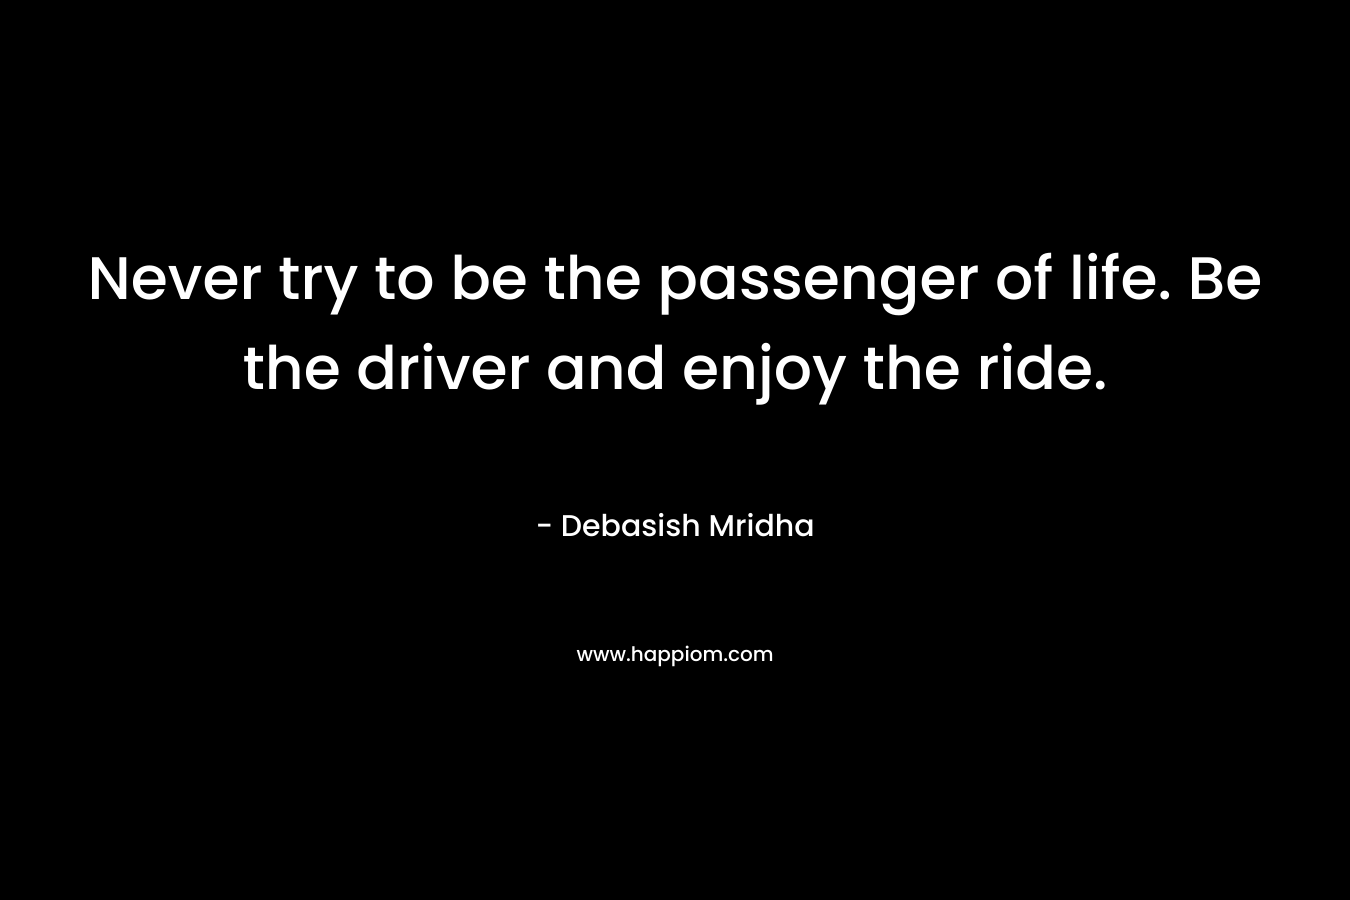 Never try to be the passenger of life. Be the driver and enjoy the ride. – Debasish Mridha